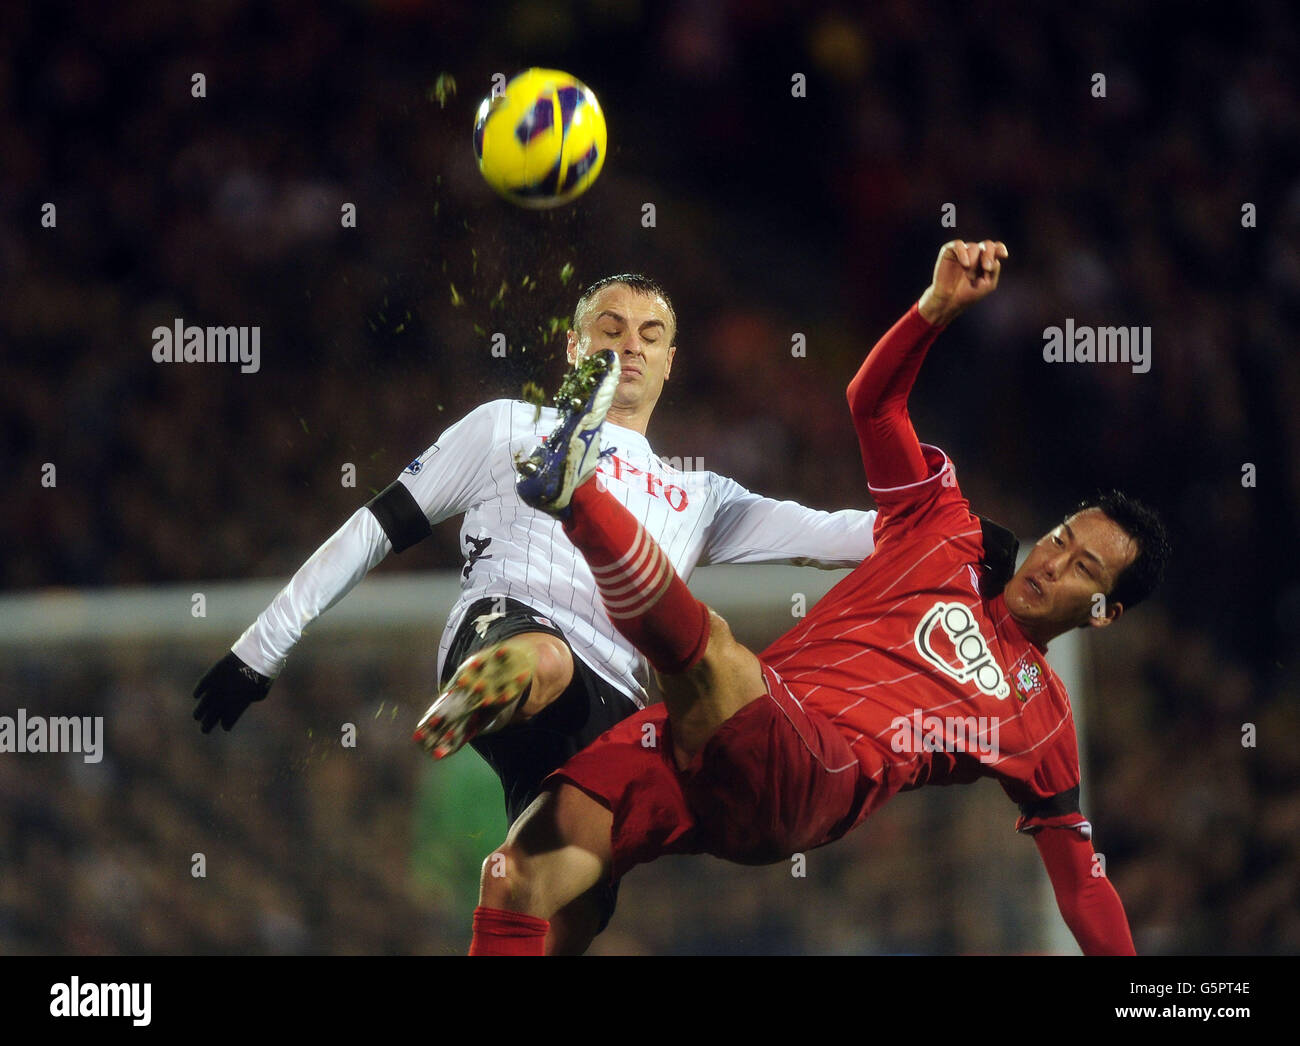 Fulham's Dimitar Berbatov and Southampton's Yoshida Maya battle for the ball during the Barclays Premier League match at Craven Cottage, London. Stock Photo